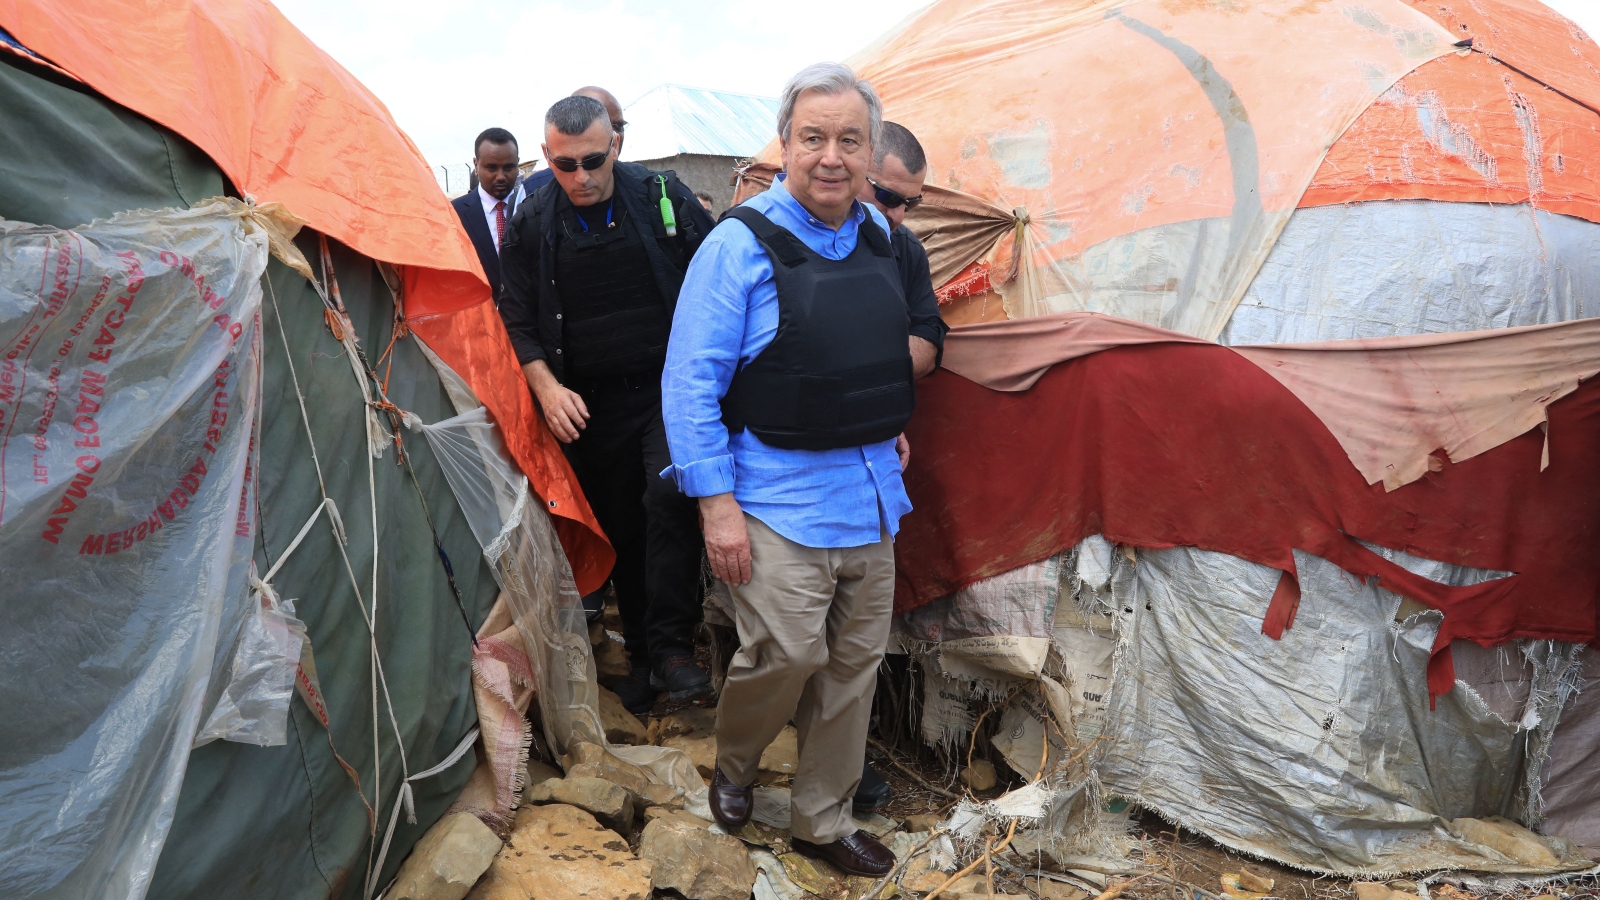 United Nations Secretary General Antonio Guterres visits an displaced persons camp in Baidoa, Somalia. Guterres has appealed for international support for Somalia as it battles an extreme drought.